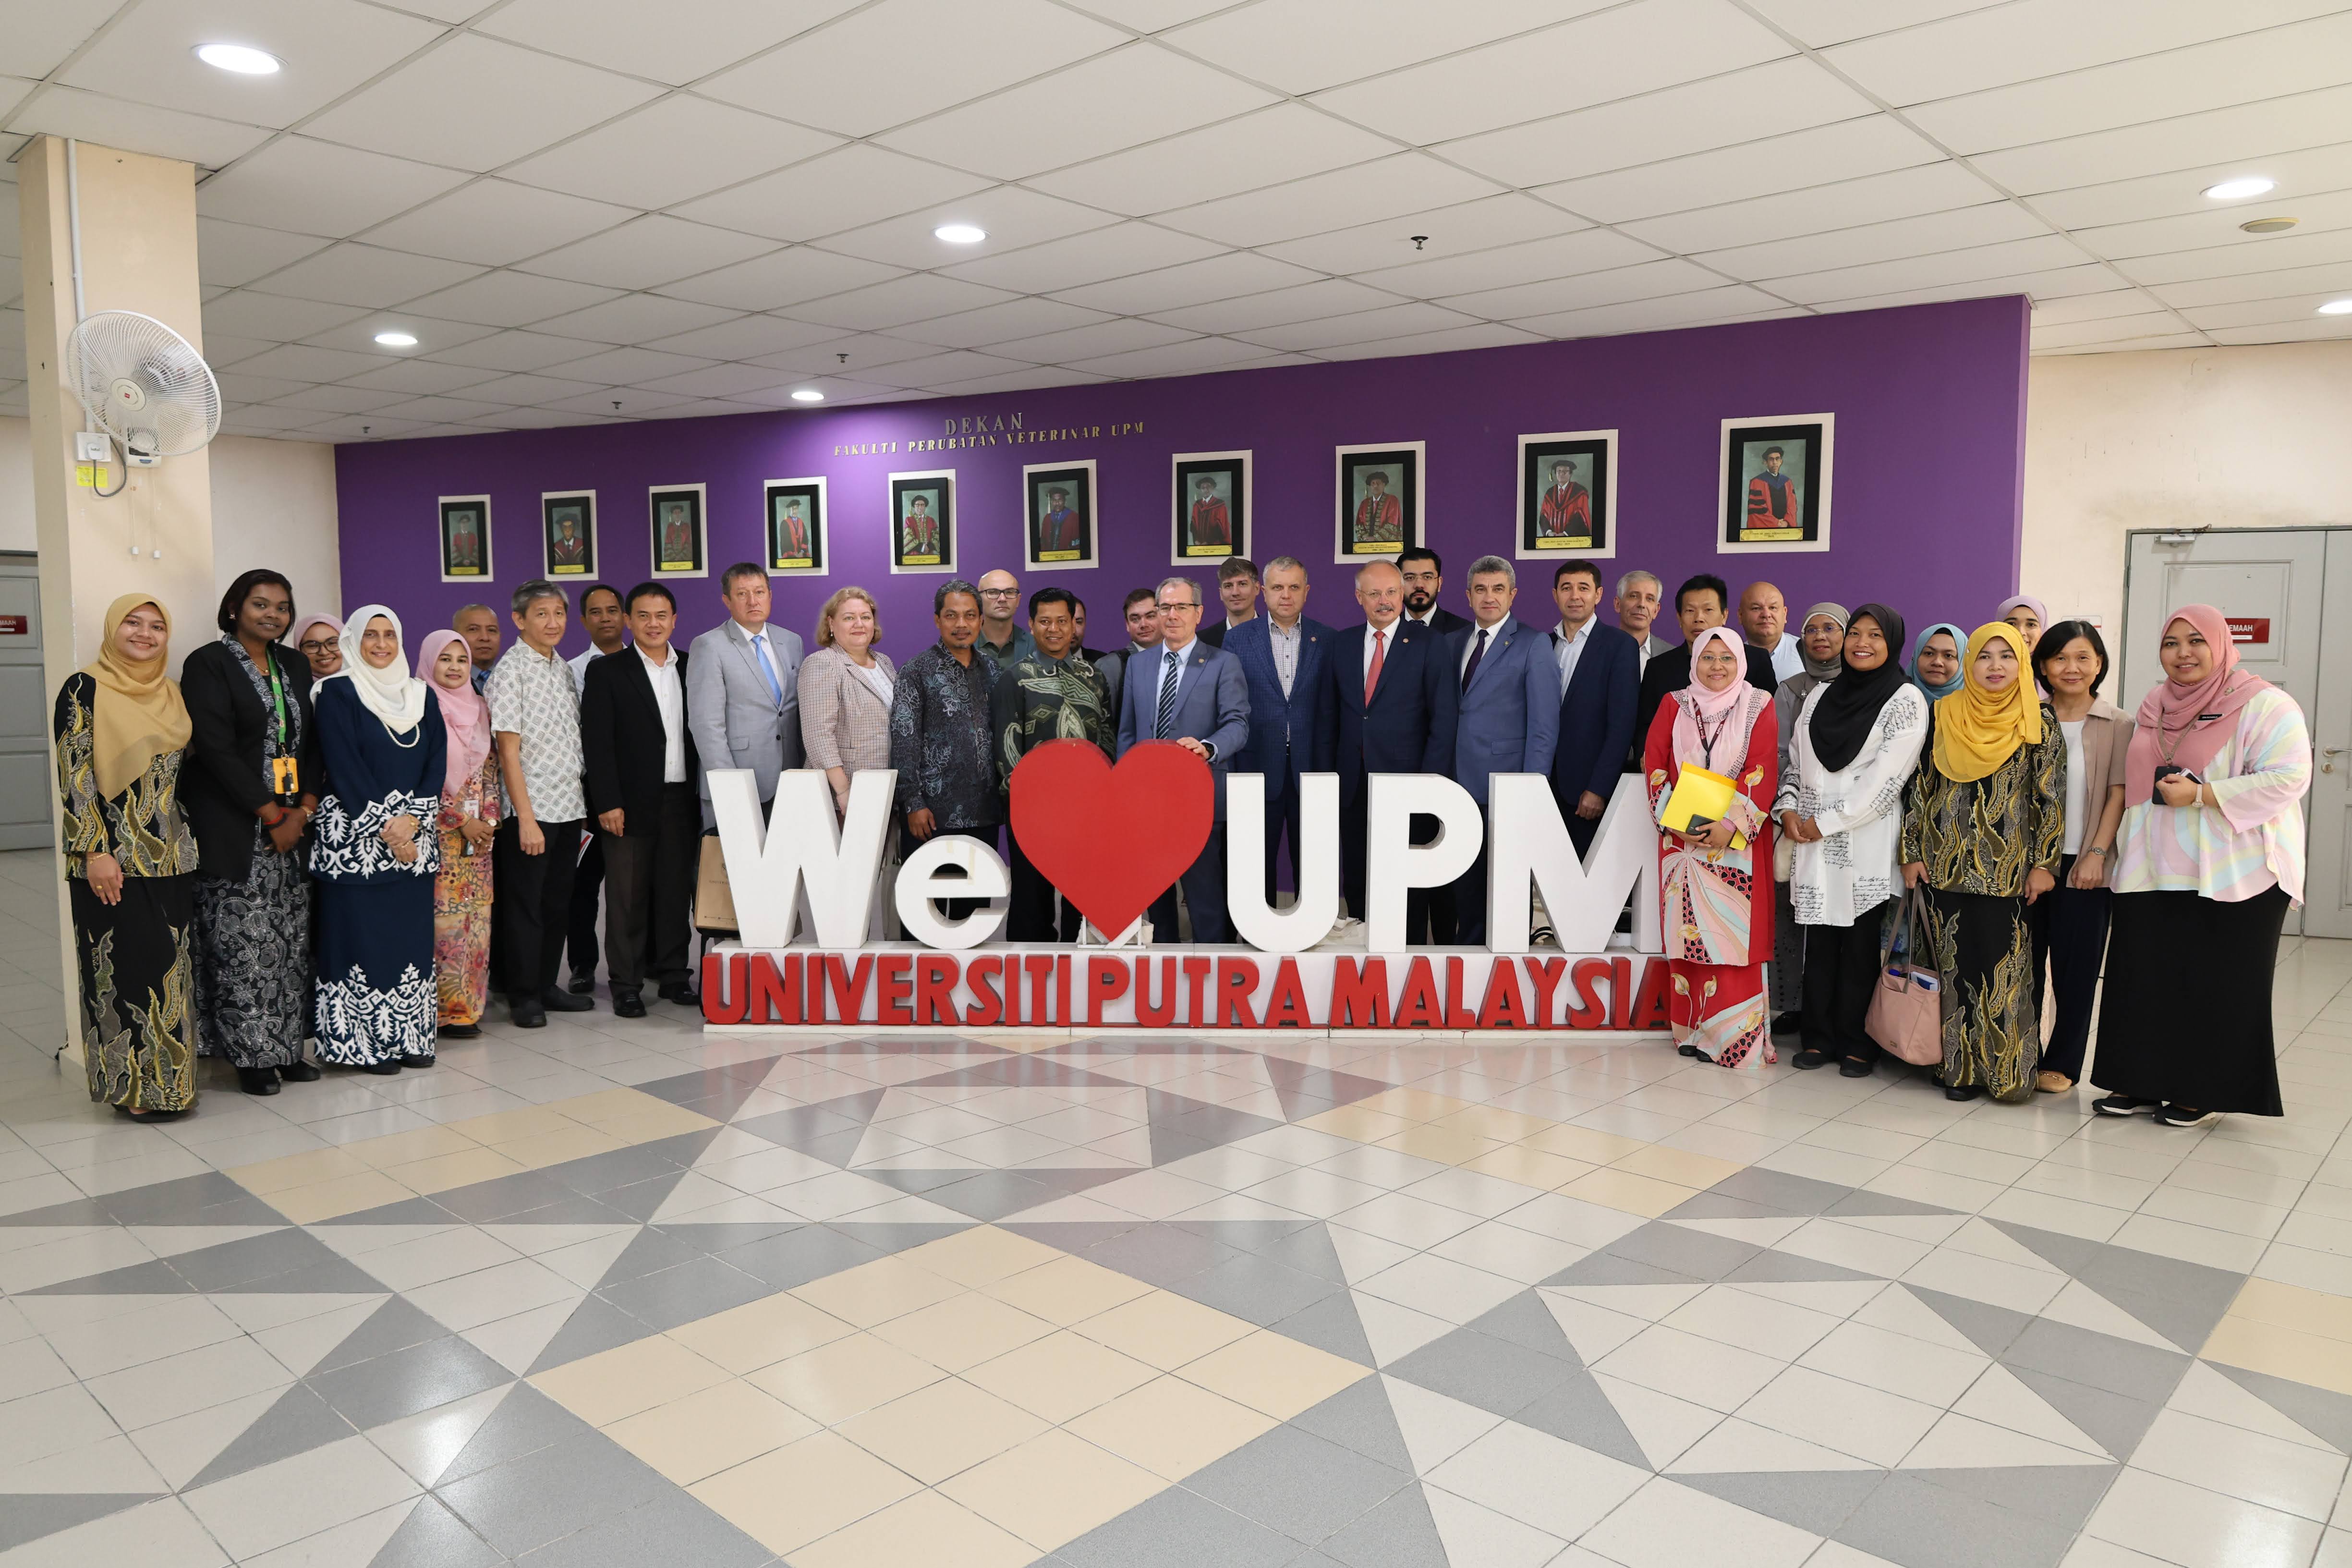 Republic of Tatarstan Delegation Strengthens Academic Ties with UPM During Working Visit